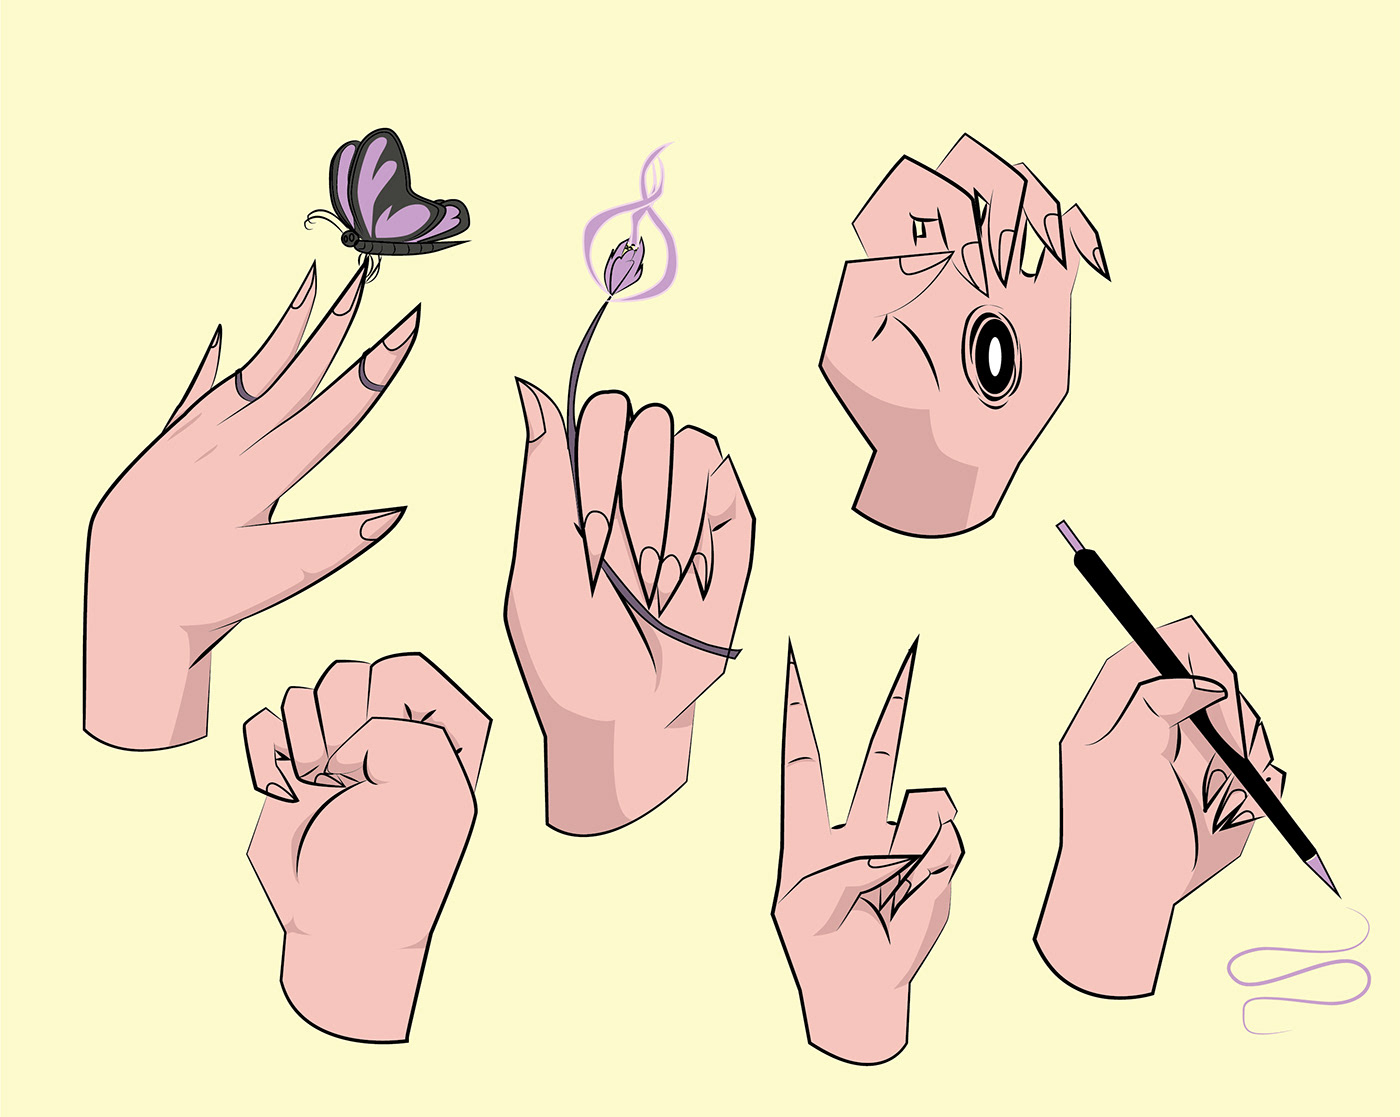 Here are some examples of hand gestures